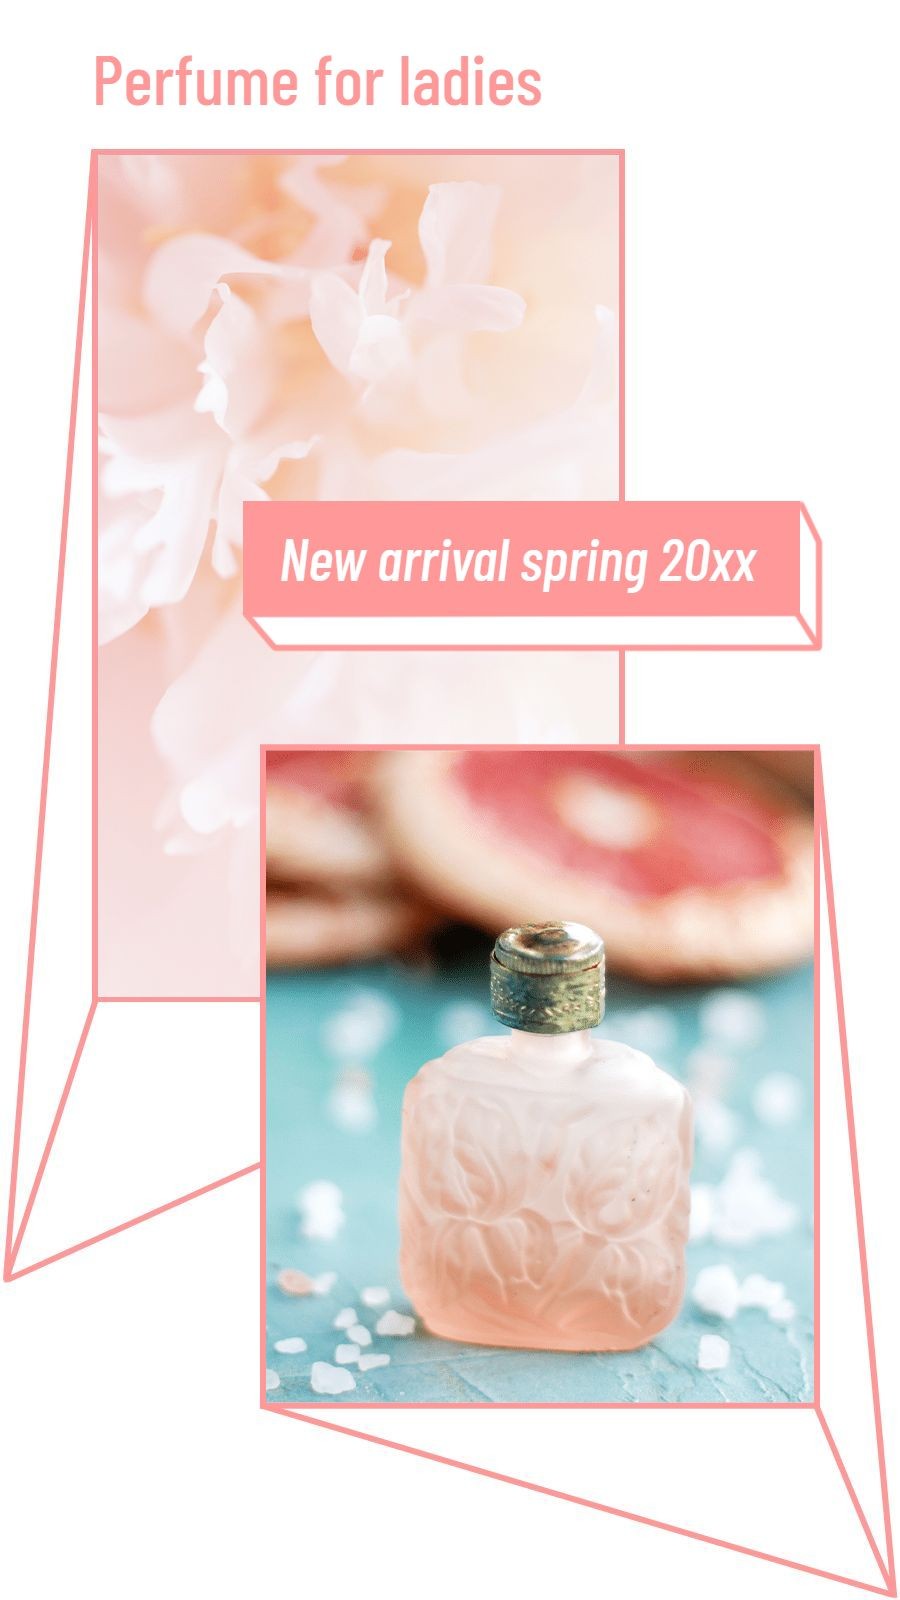 Simple Fashion Perfume Spring New Arrival Display Instagram Story预览效果